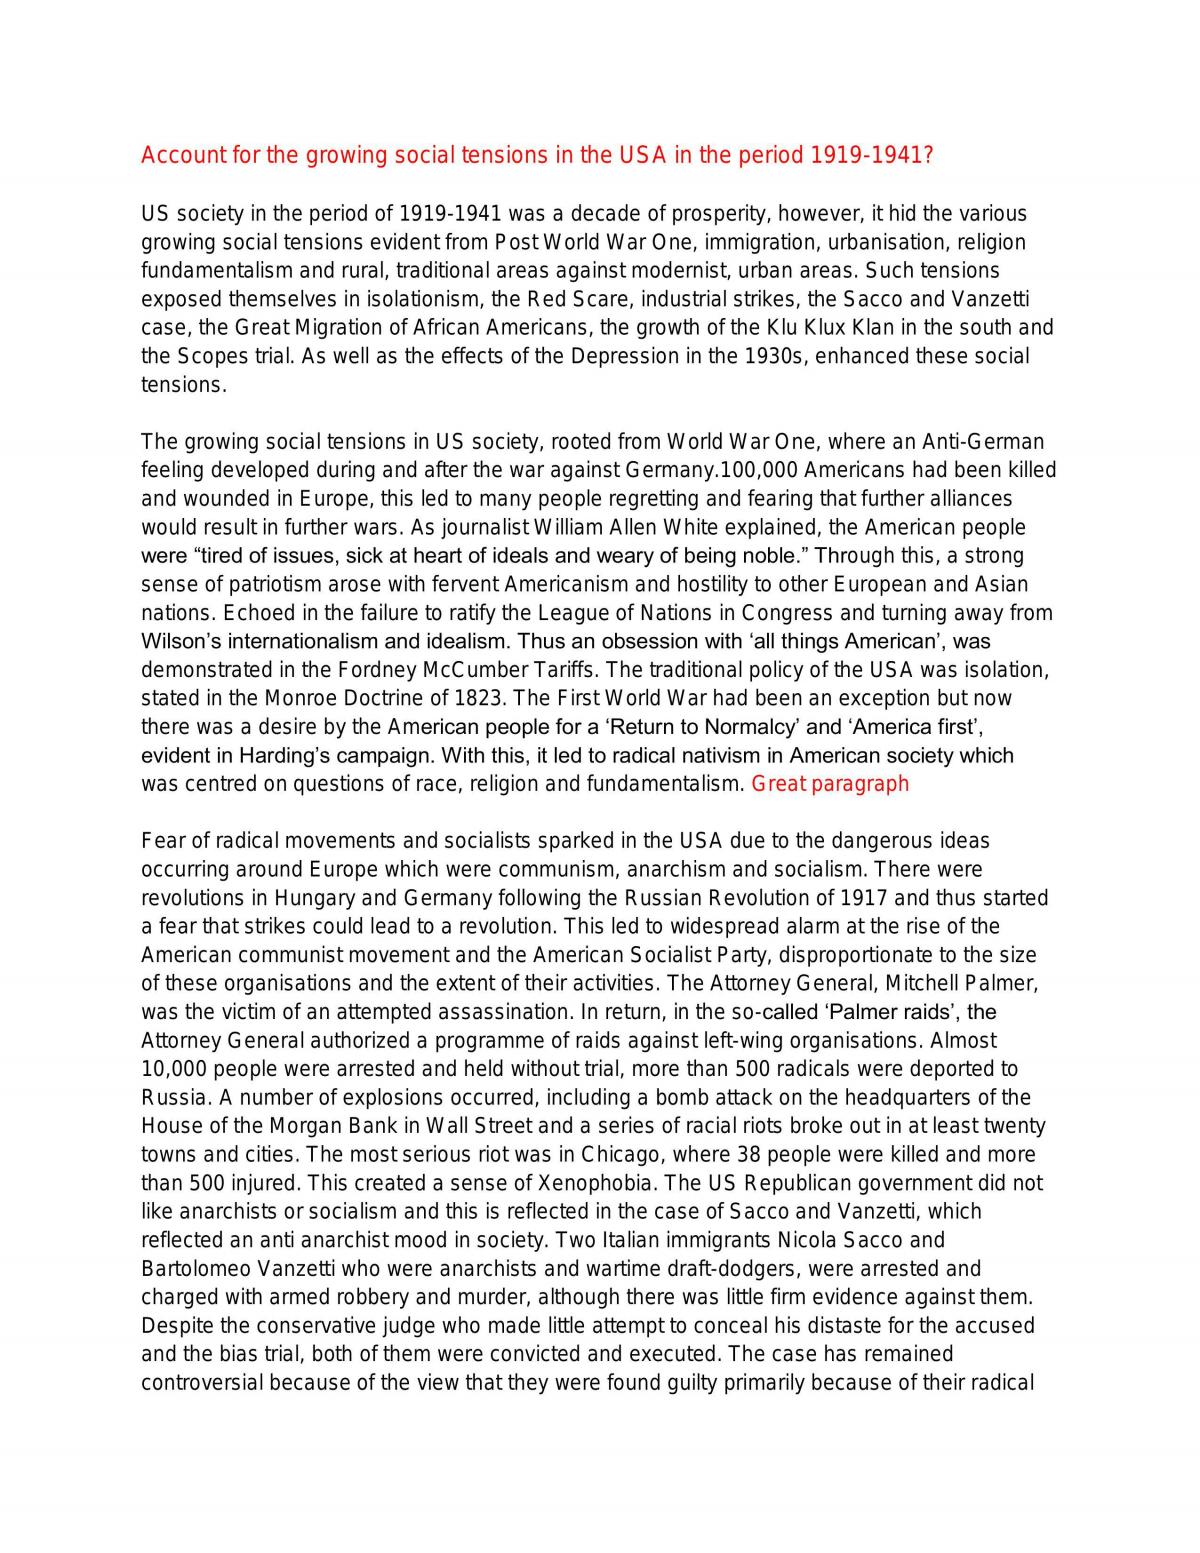 Social Tensions Essay - USA Society 1920s-1940s - Modern History HSC - Page 1